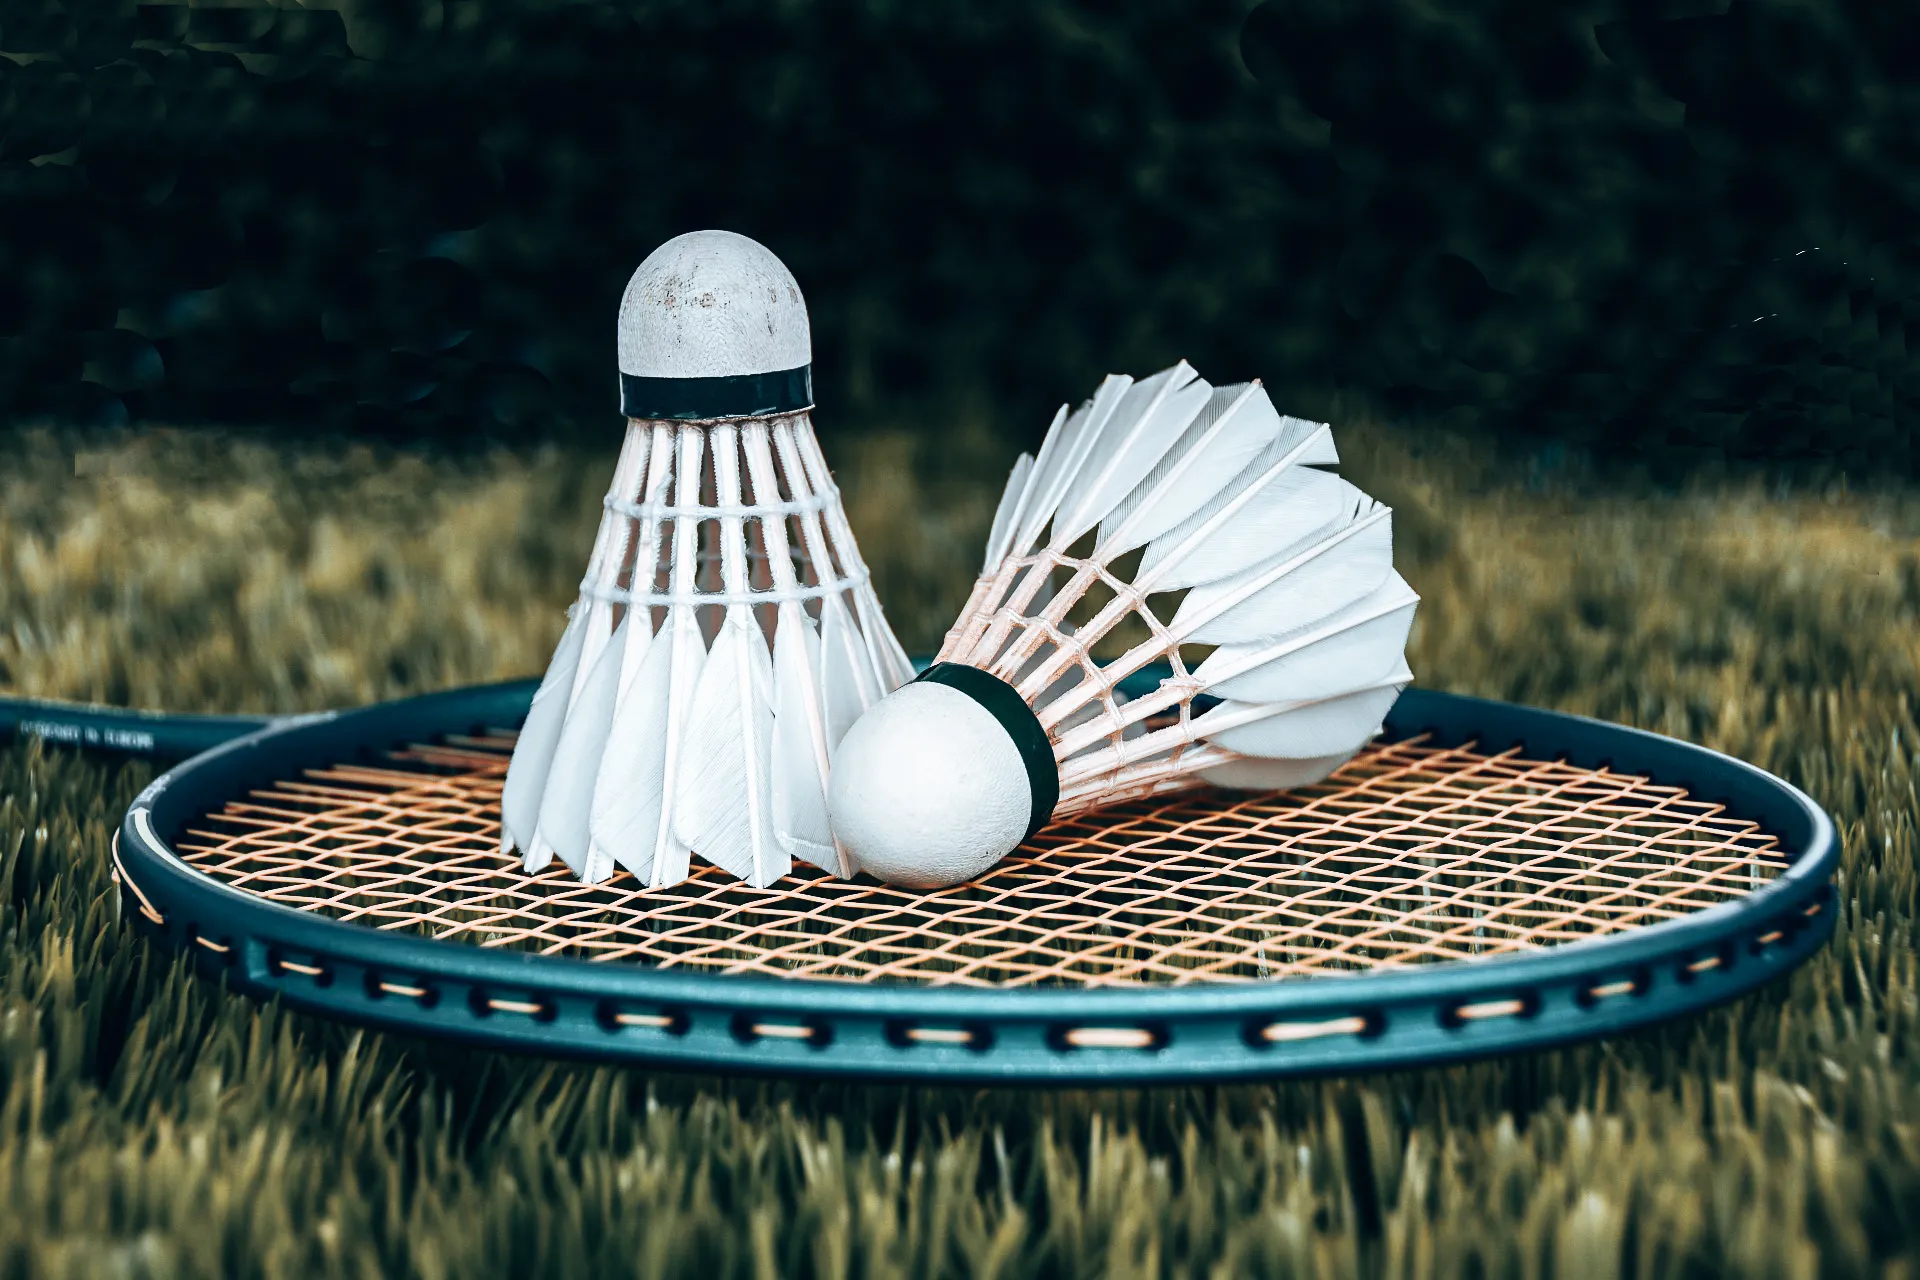 8 Fun Facts About Badminton You Didn’t Know